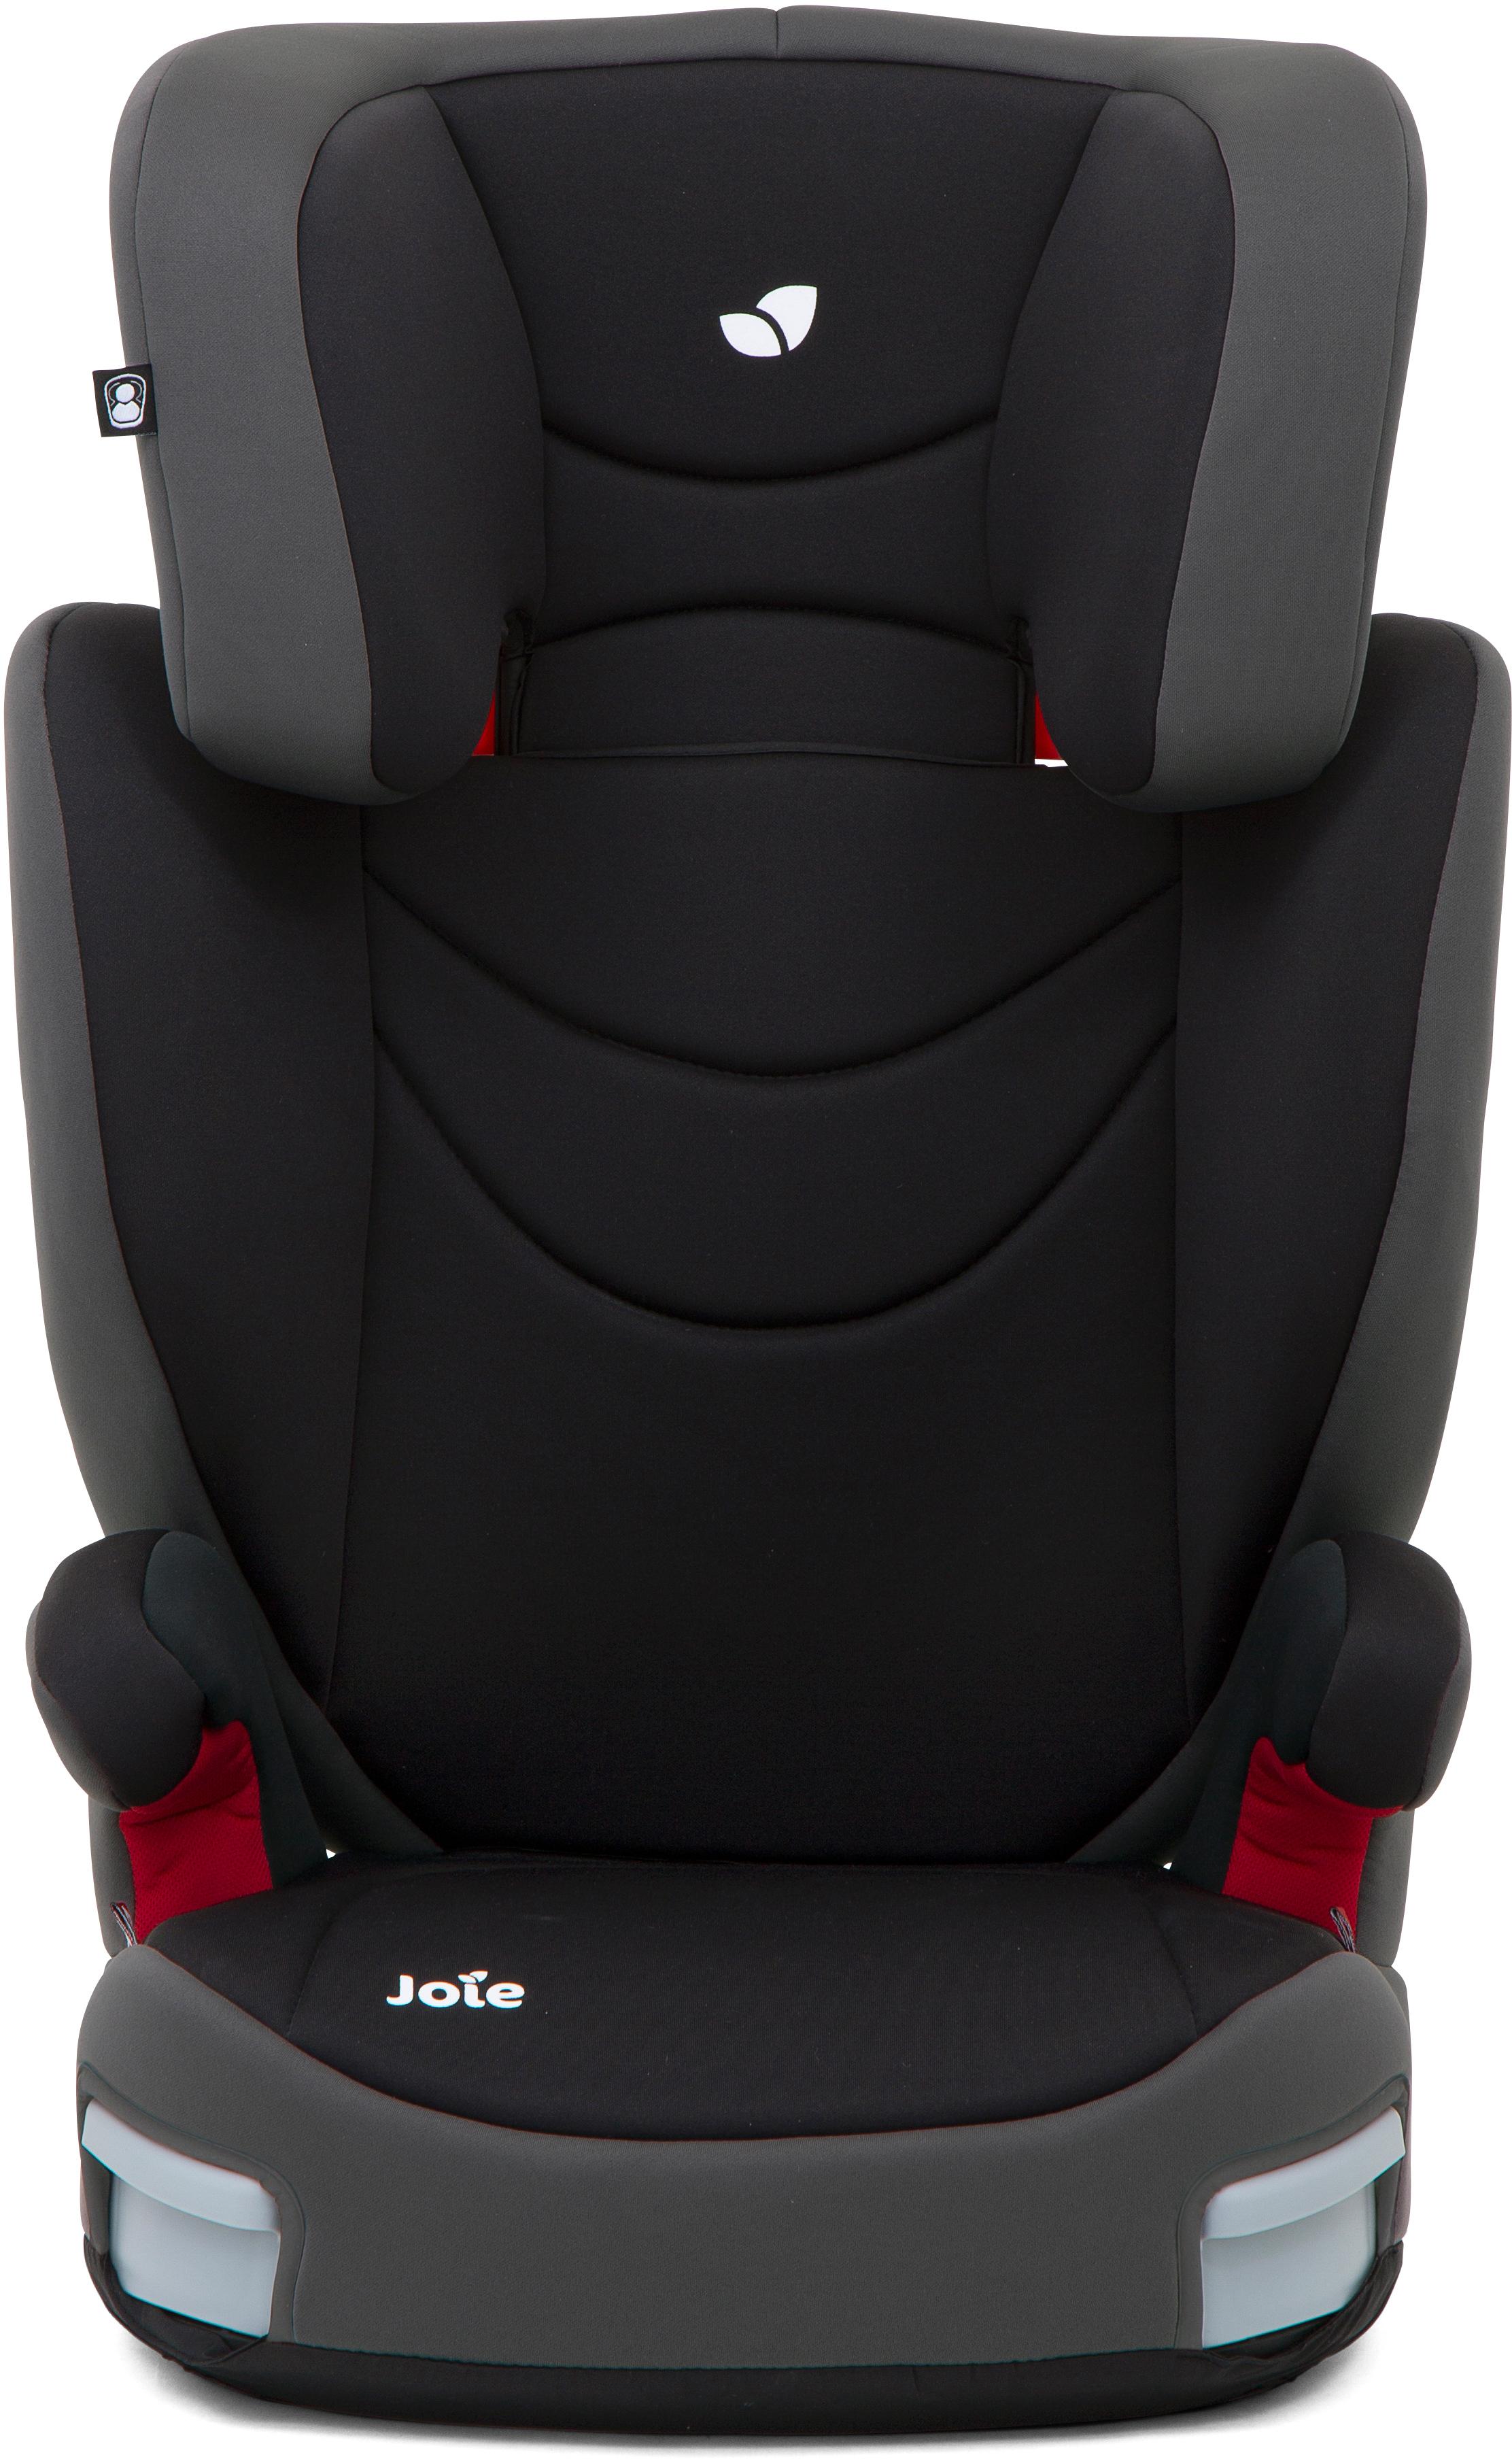 Joie Trillo Group 2/3 Child Car Seat 